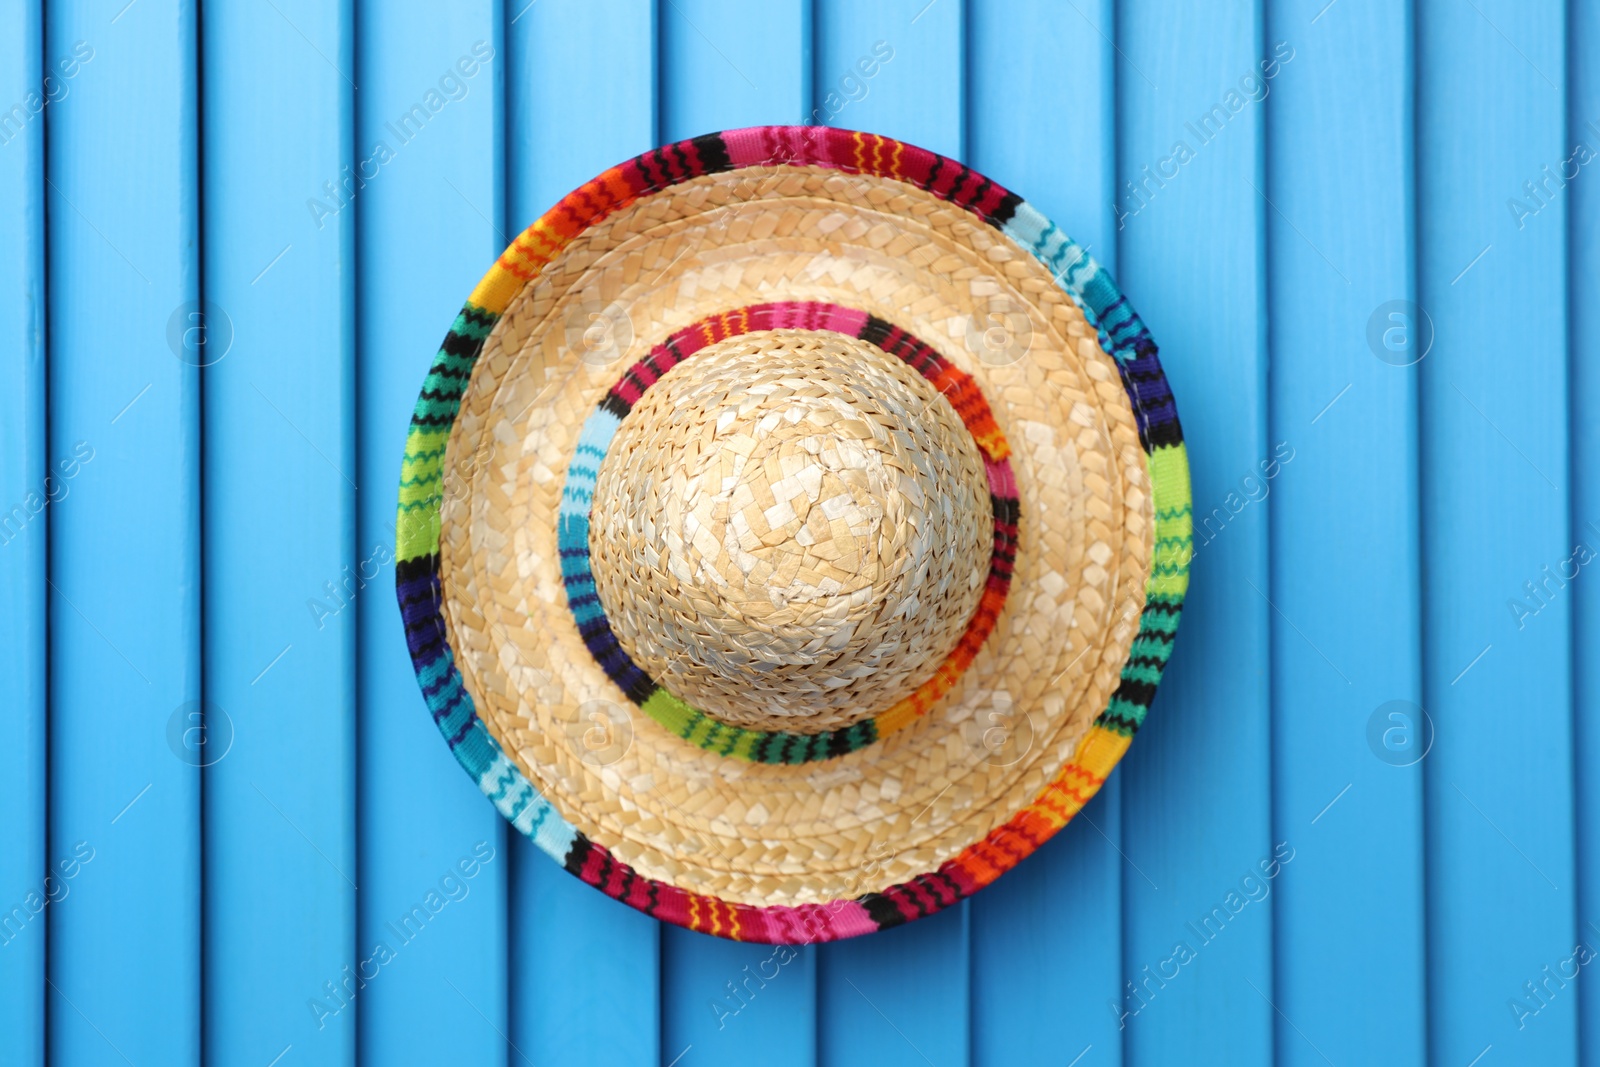 Photo of Mexican sombrero hat on blue wooden surface, top view